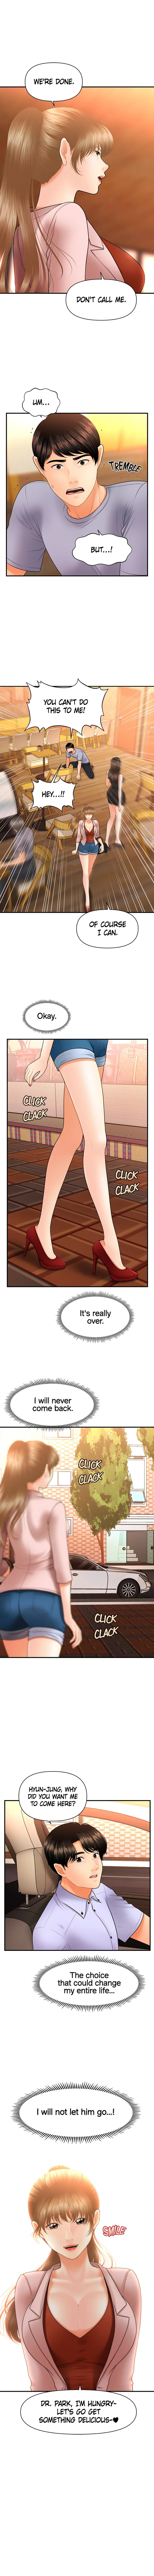 You’re so Handsome - Chapter 37 Page 1